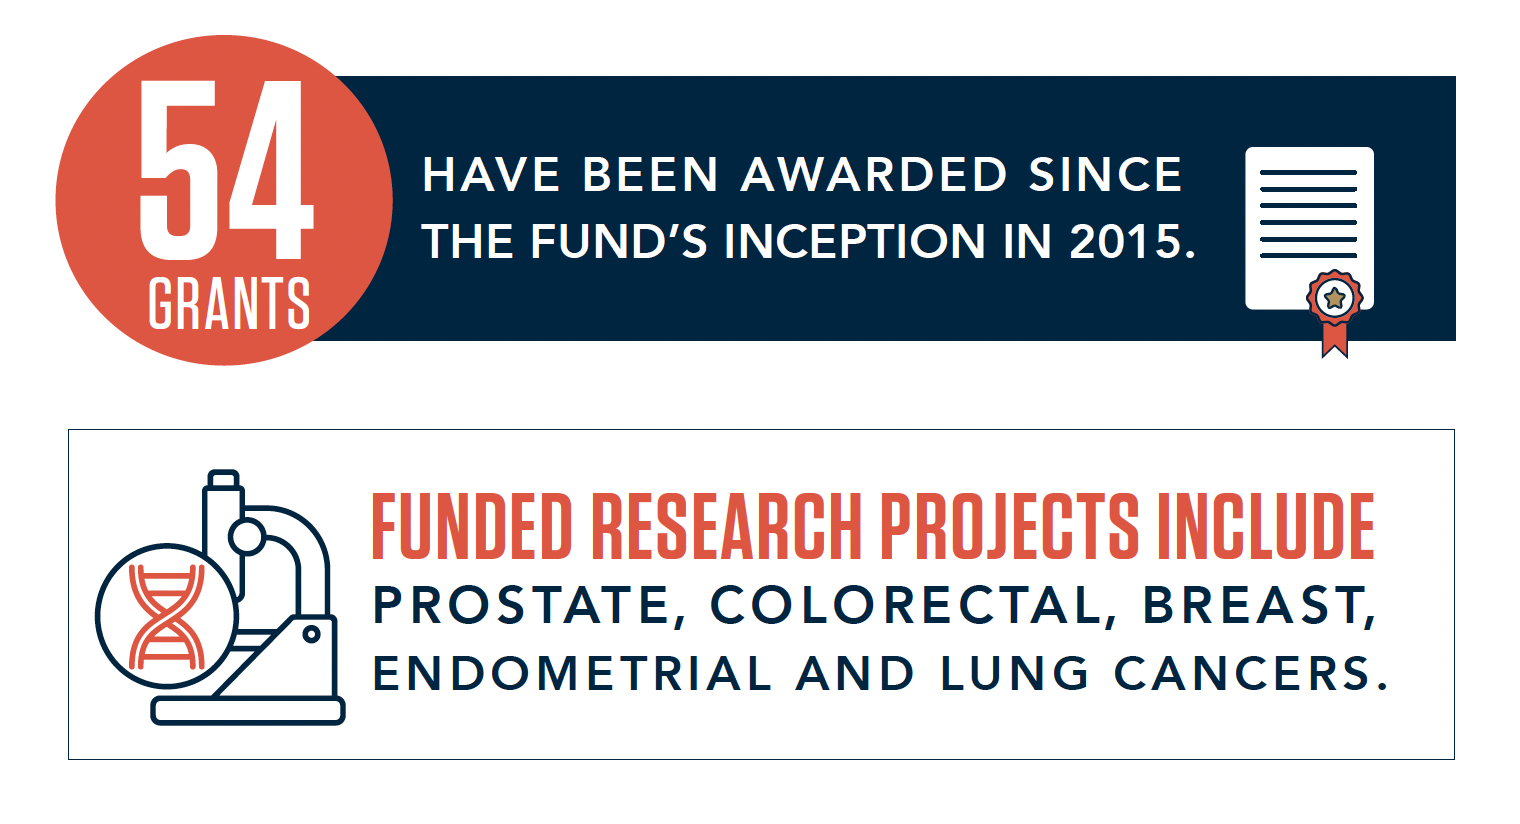 54 GRANTS HAVE BEEN AWARDED SINCE THE FUND’S INCEPTION IN 2015. FUNDED RESEARCH PROJECTS INCLUDE PROSTATE, COLORECTAL, BREAST, ENDOMETRIAL AND LUNG CANCERS.